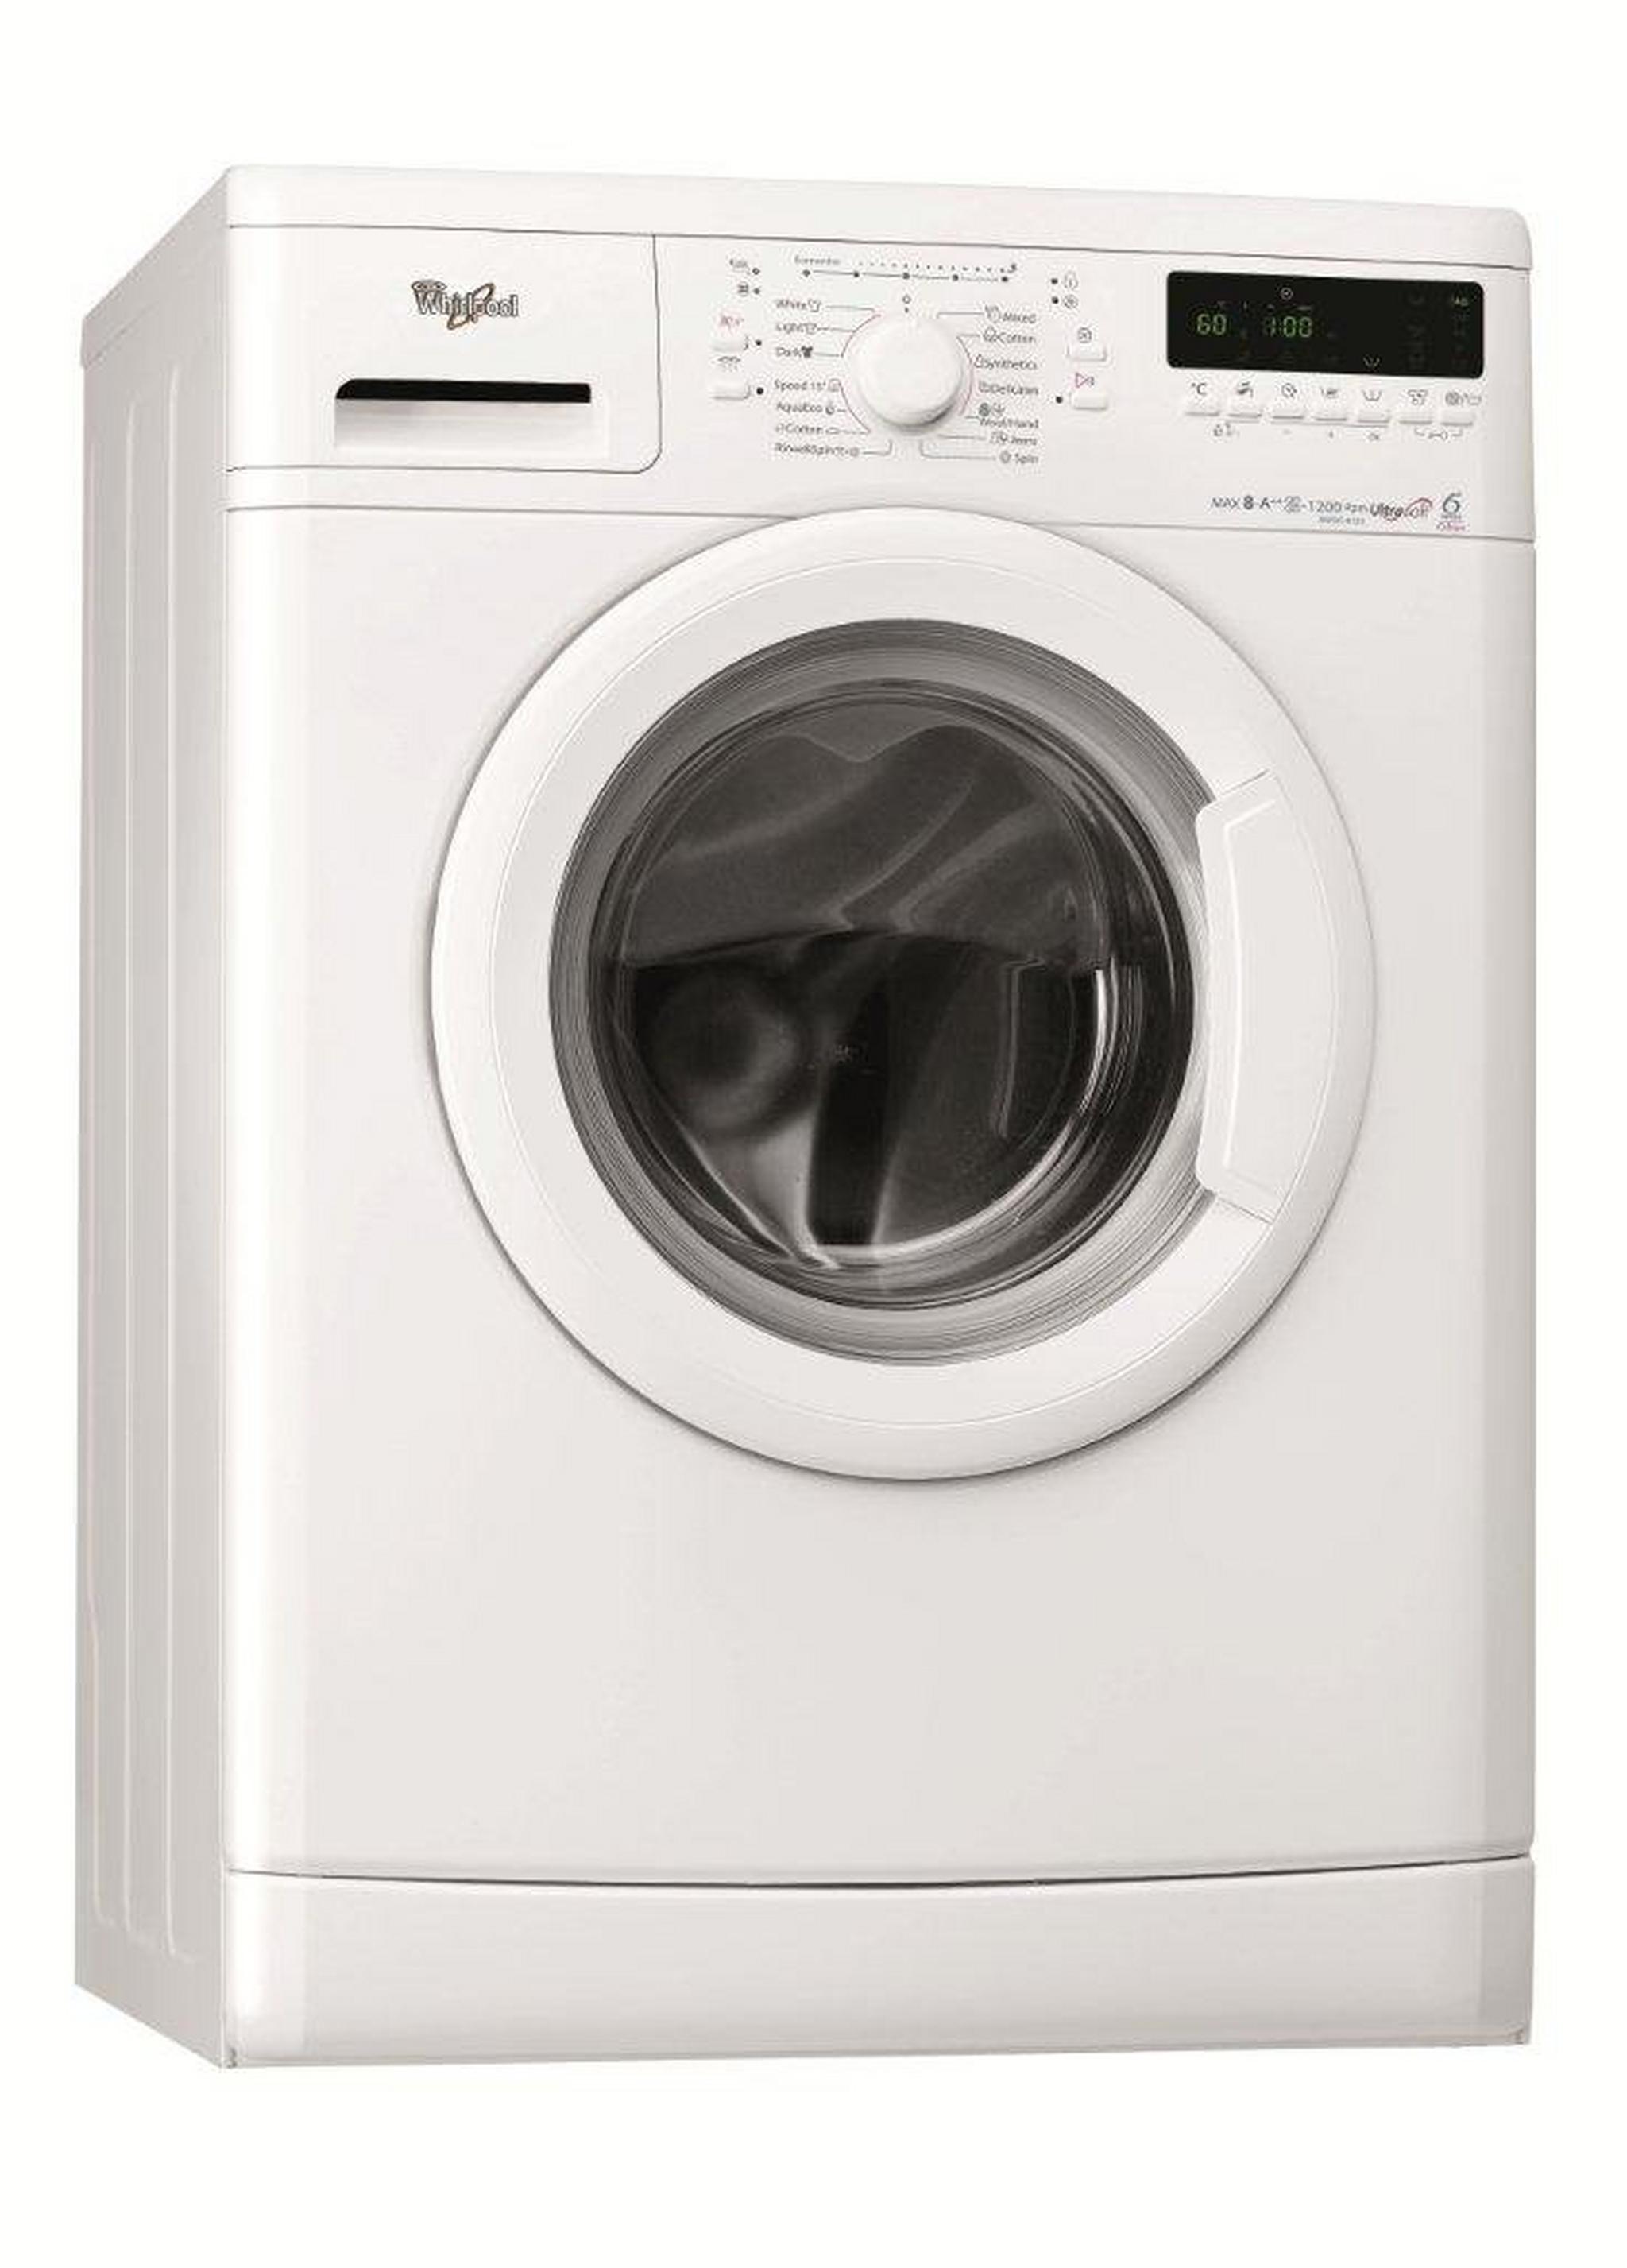 Whirlpool AWOC 8129 Front Loader Washer 8kg - White